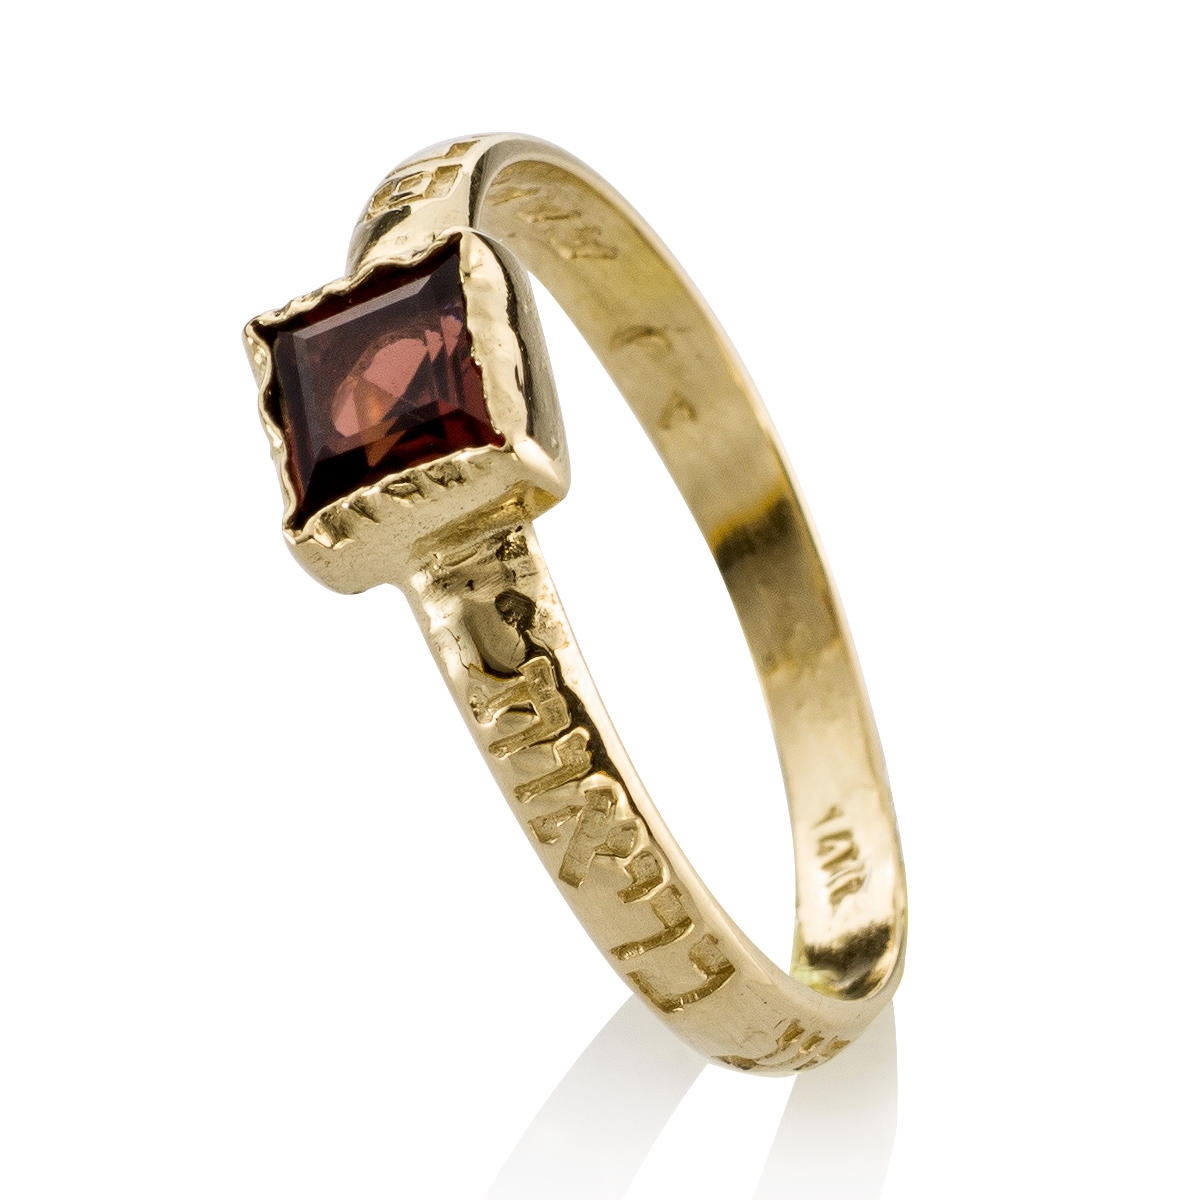 14K Gold Noa Blessings Ring with Square Garnet Stone - 1